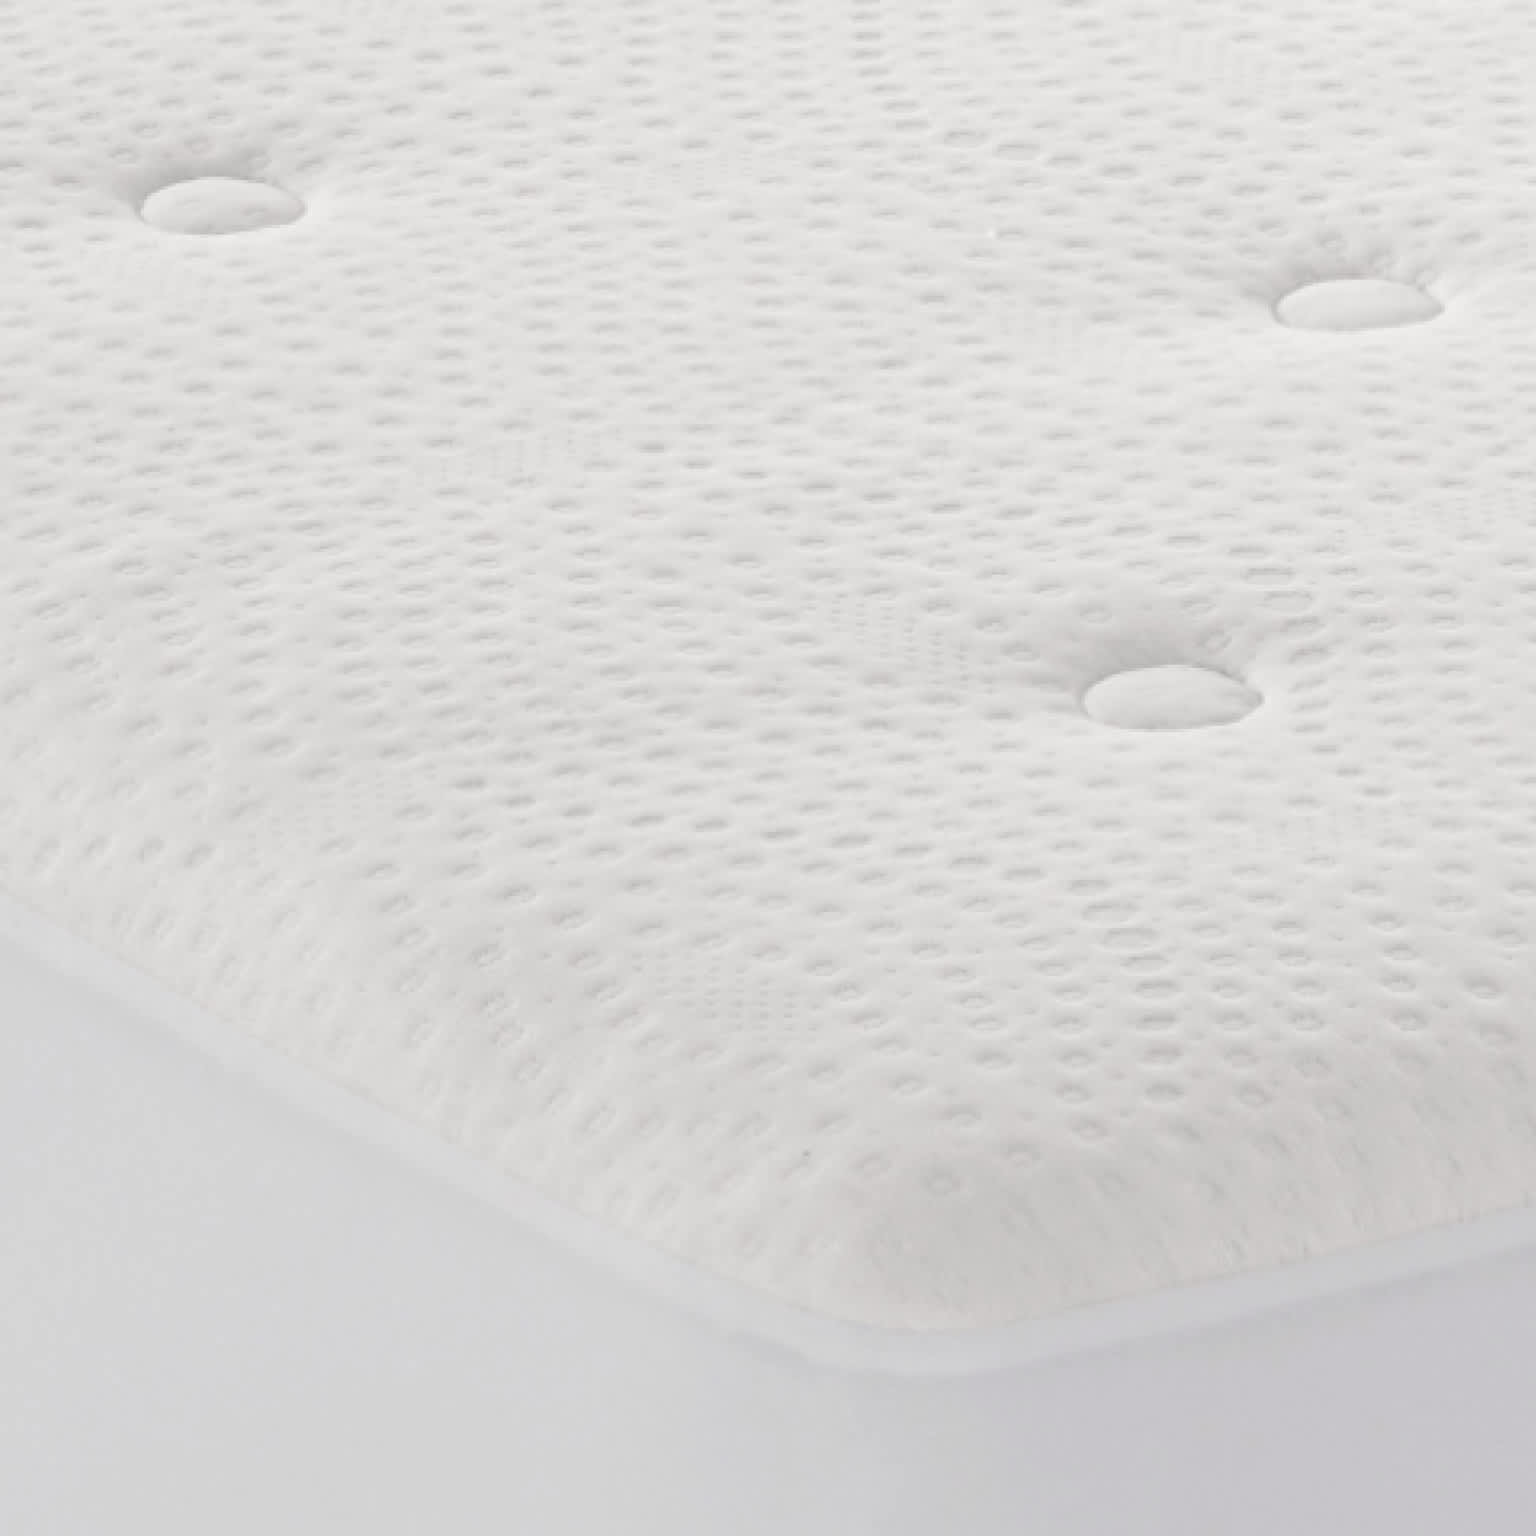 https://cdn.sleepnumber.com/image/upload/f_auto,q_auto:eco/v1682710048/workarea/catalog/product_images/climate360-total-protection-mattress-pad/C360-TPMP_PDP_Postcard_Gallery2